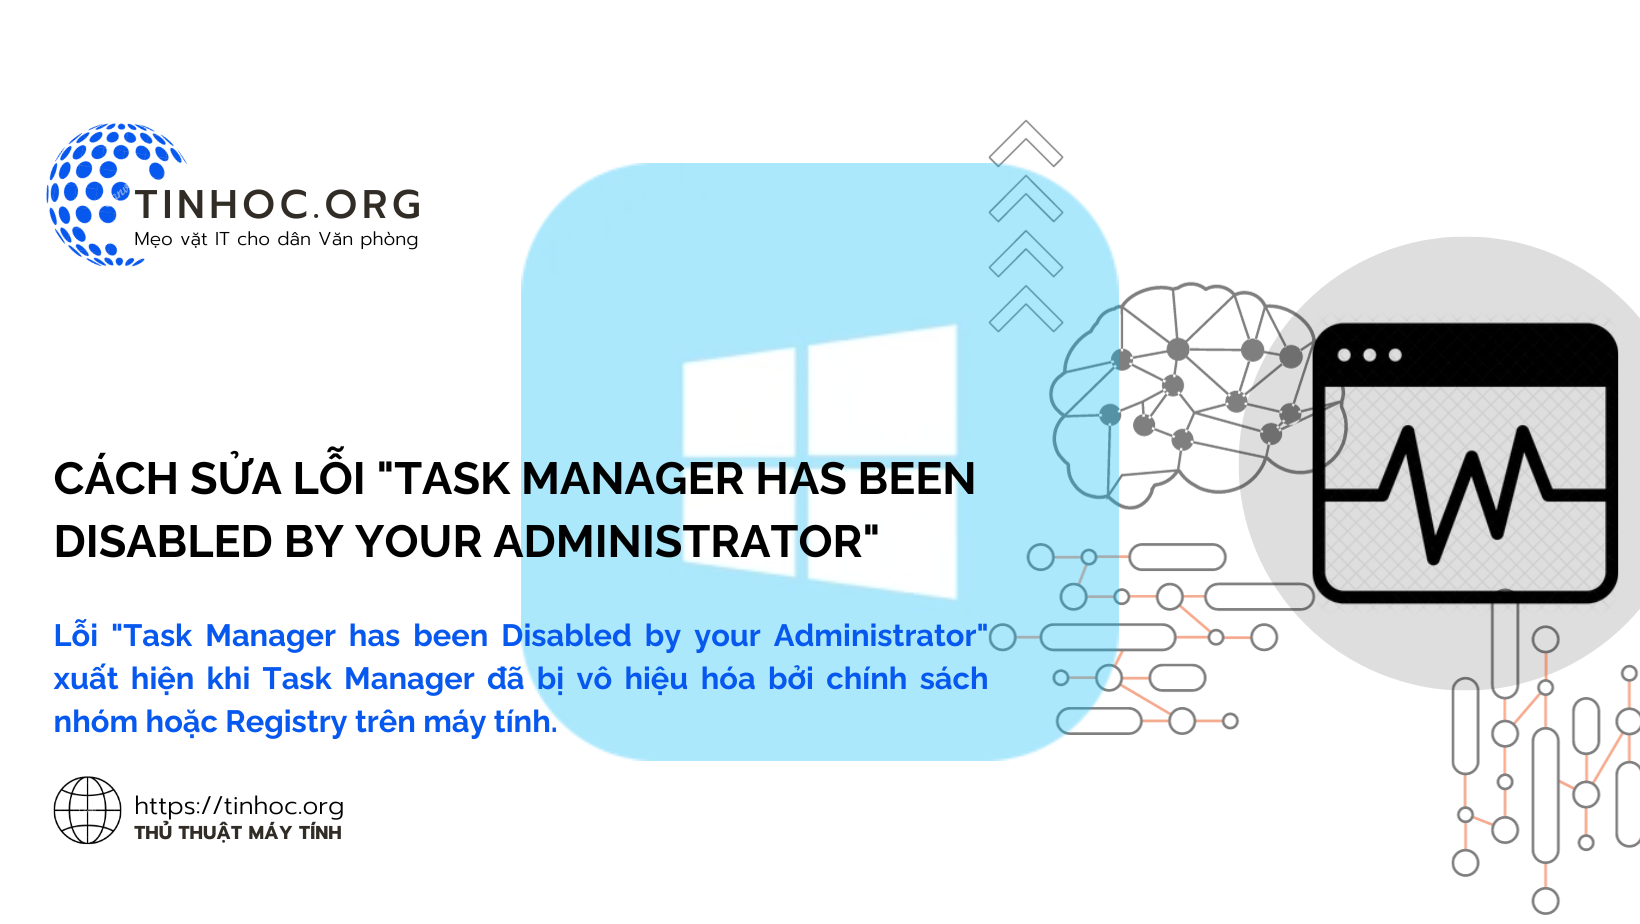 Cách sửa lỗi "Task Manager has been Disabled by your Administrator"